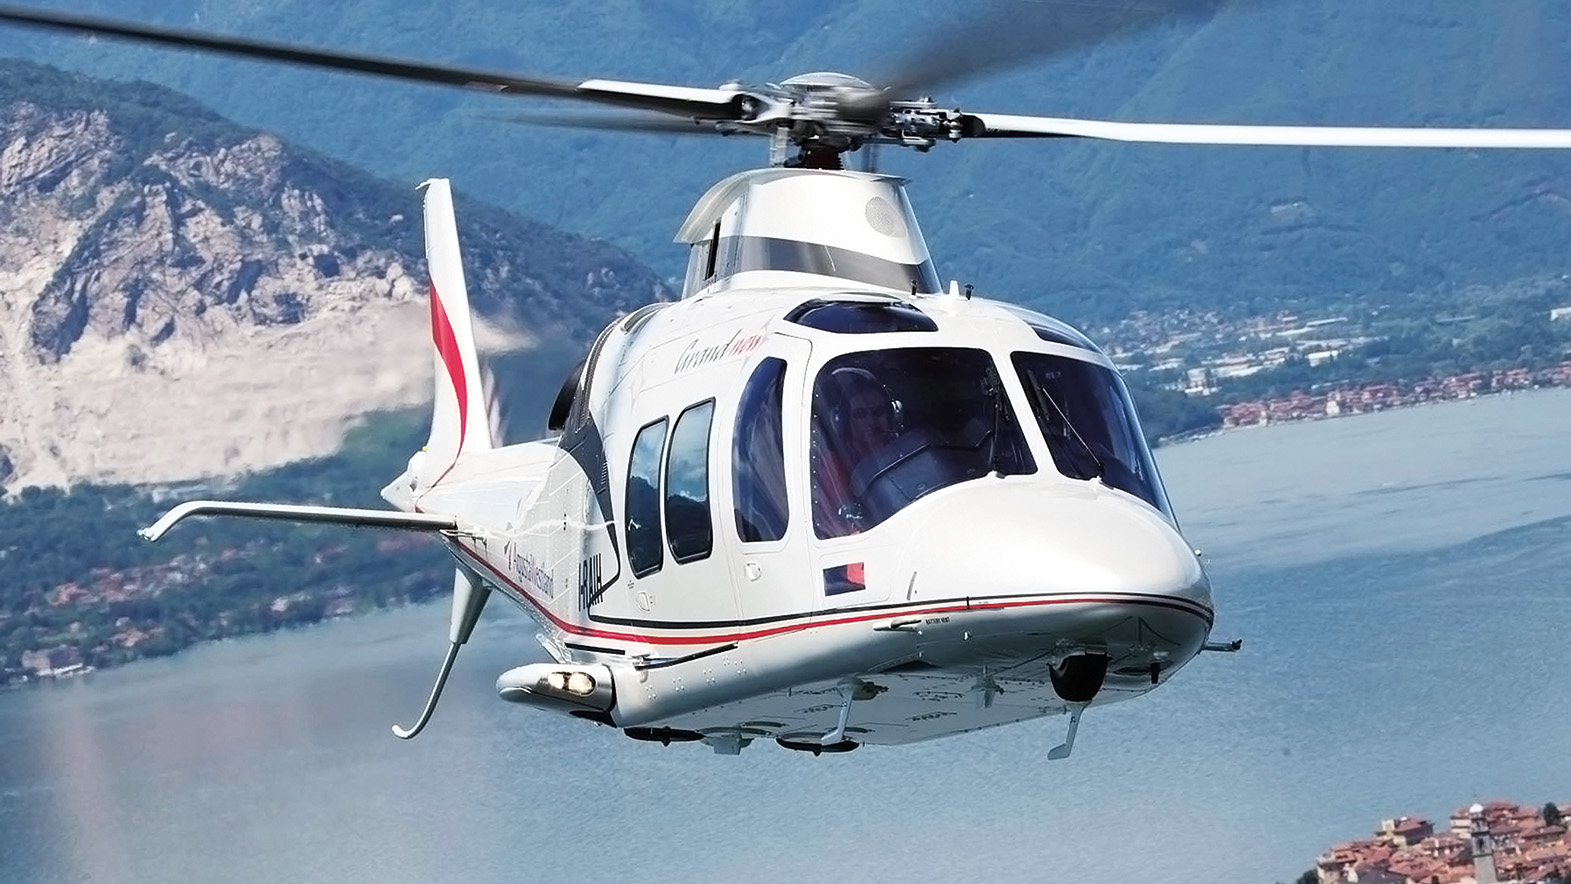 Agusta A109 Les-Arcs helicopter flights